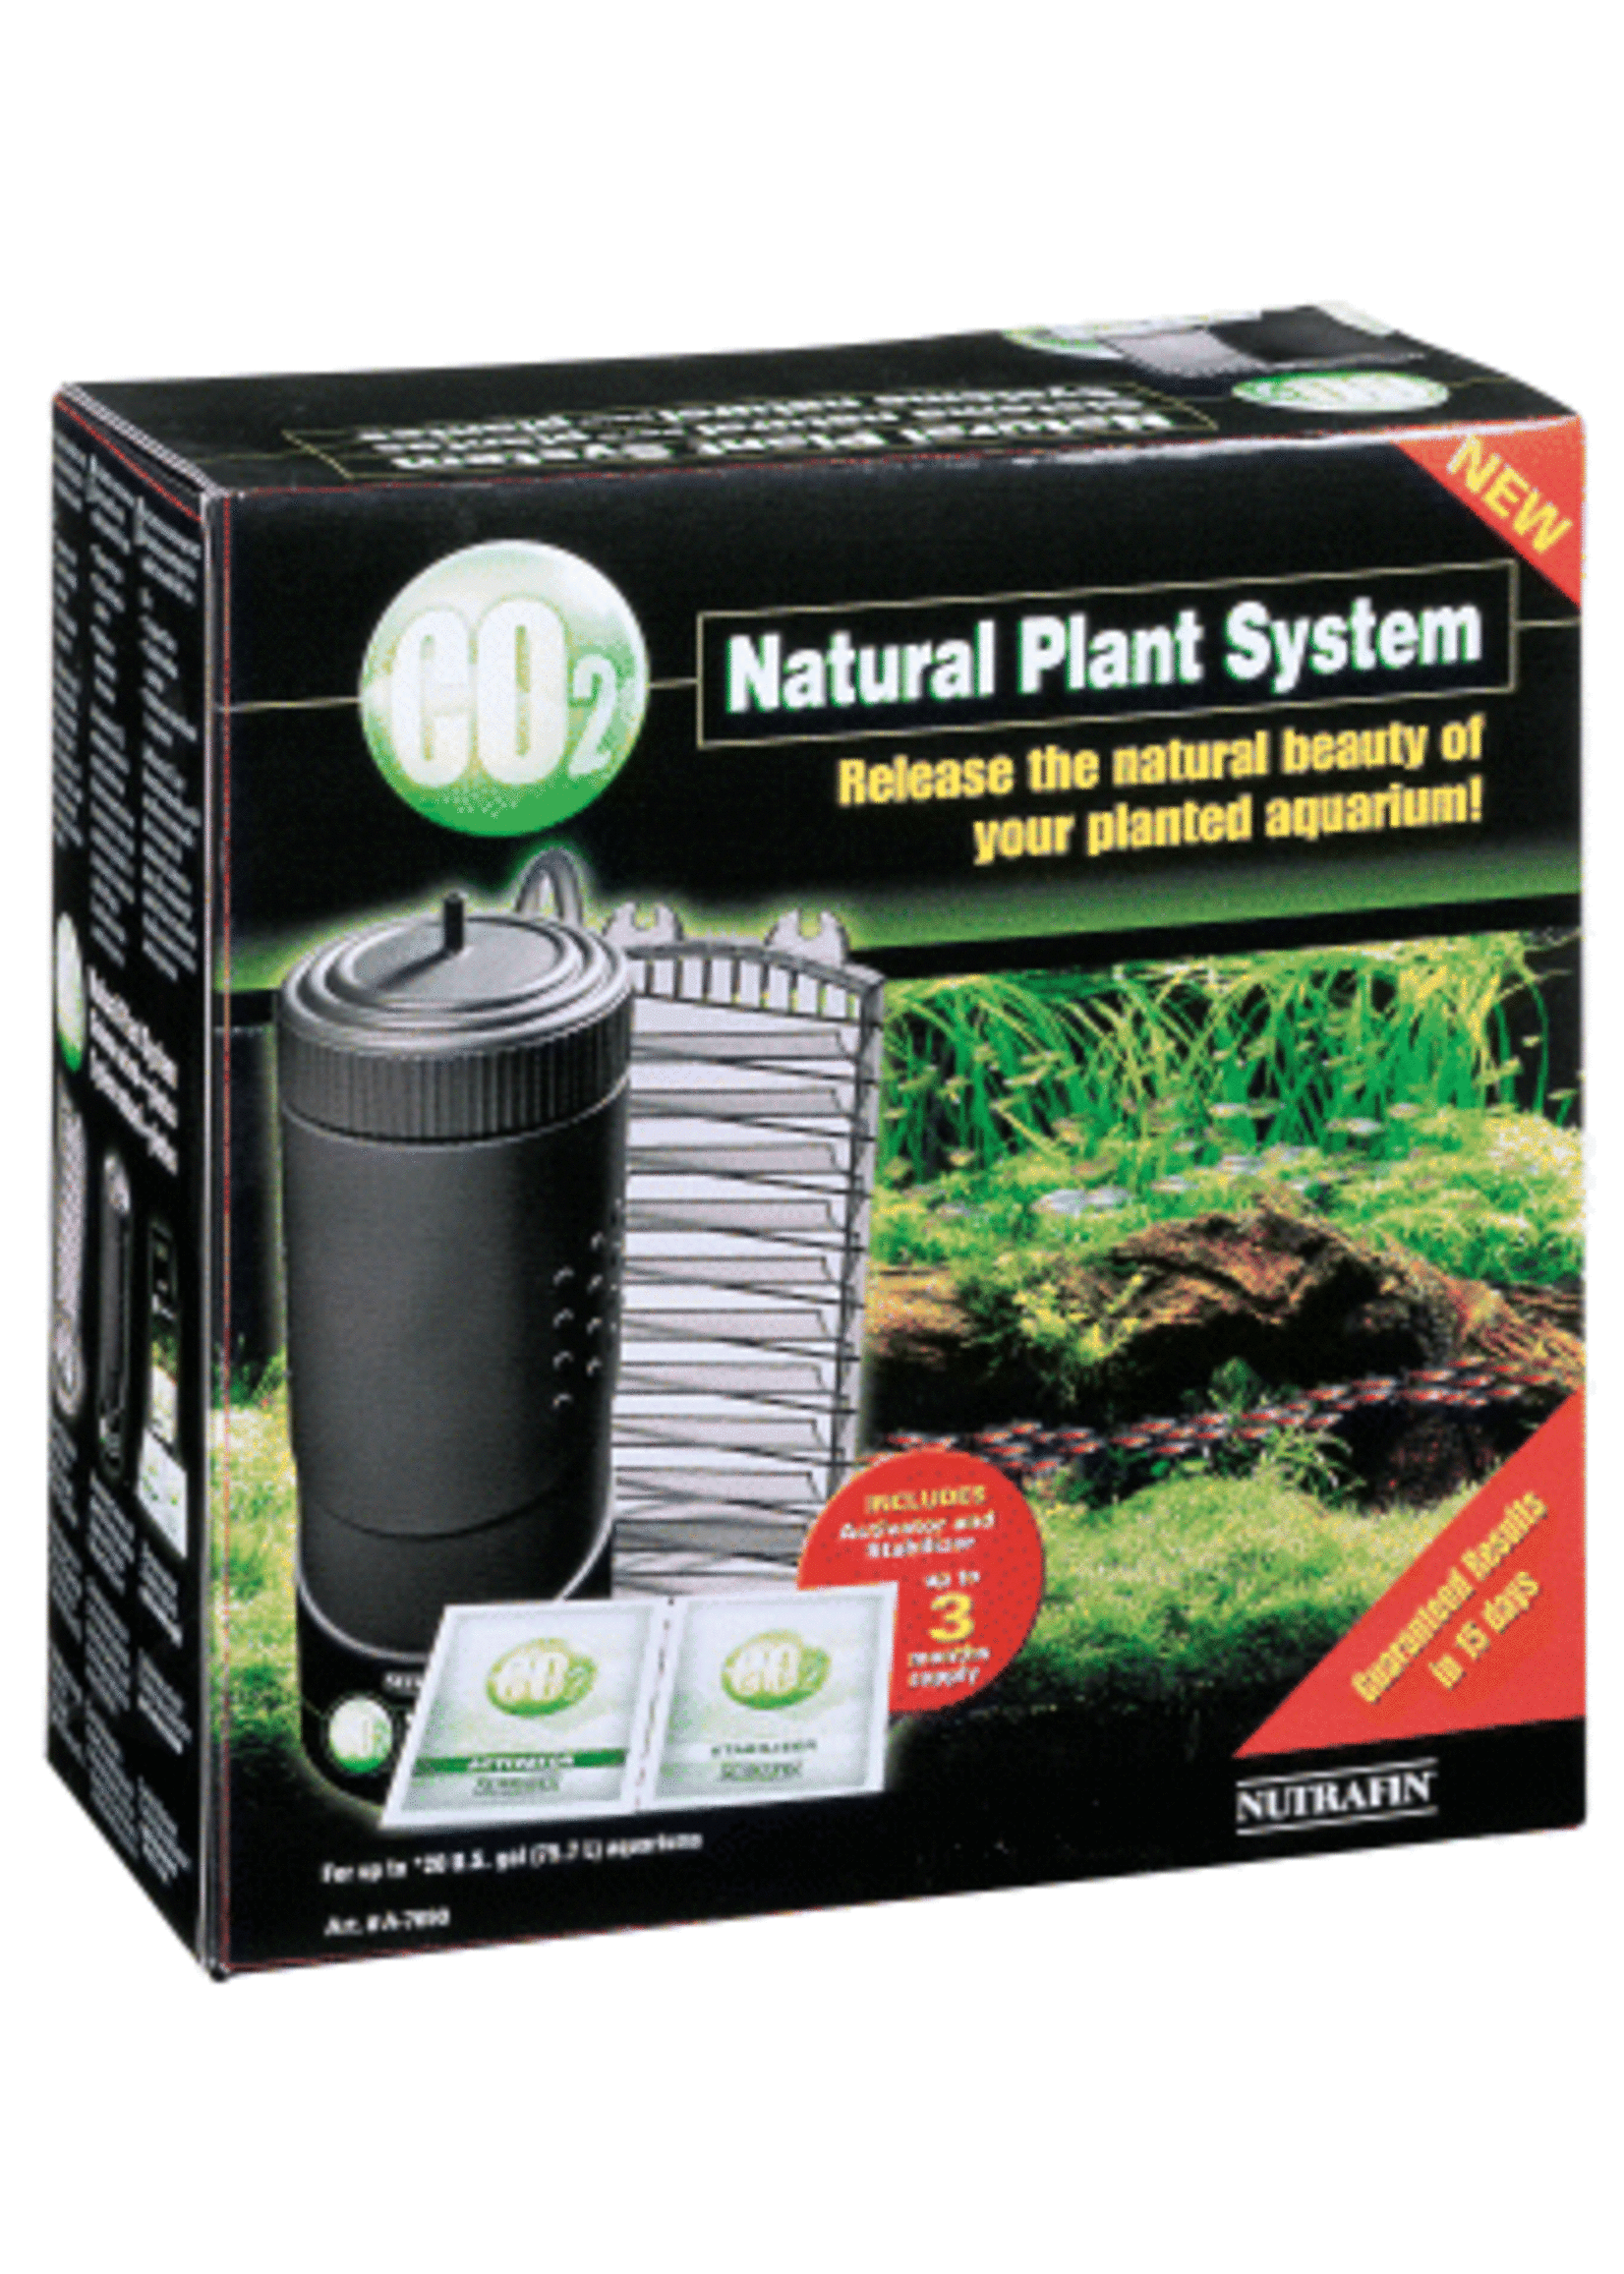 Nutrafin Nutrafin CO2 Natural Plant System